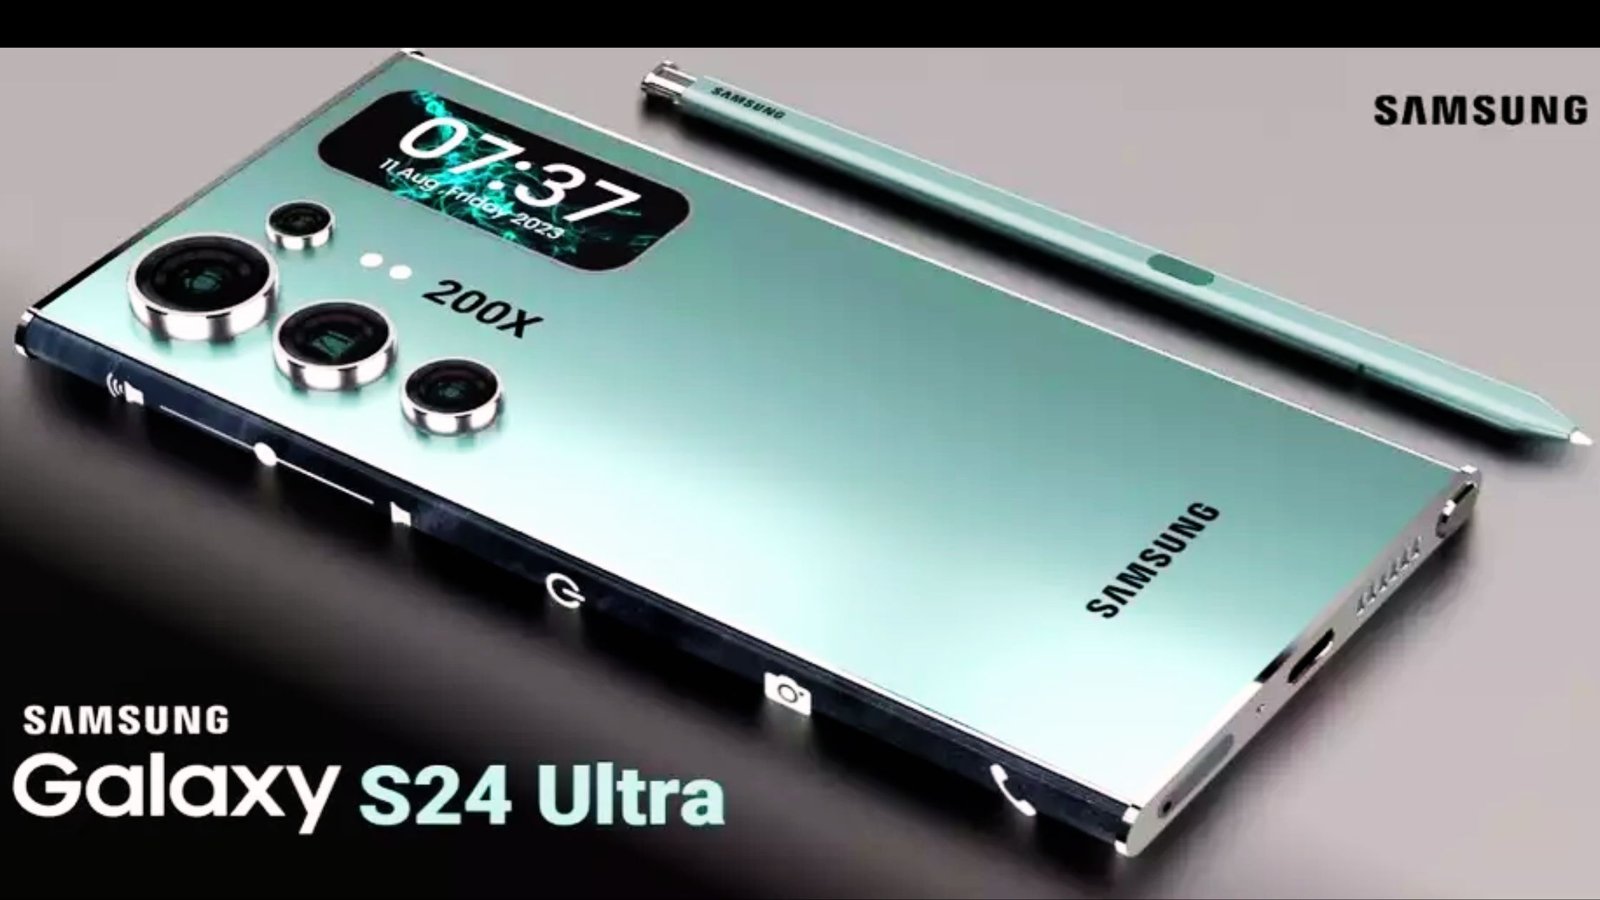 Samsung Galaxy S24 Ultra Specs and Features Leak